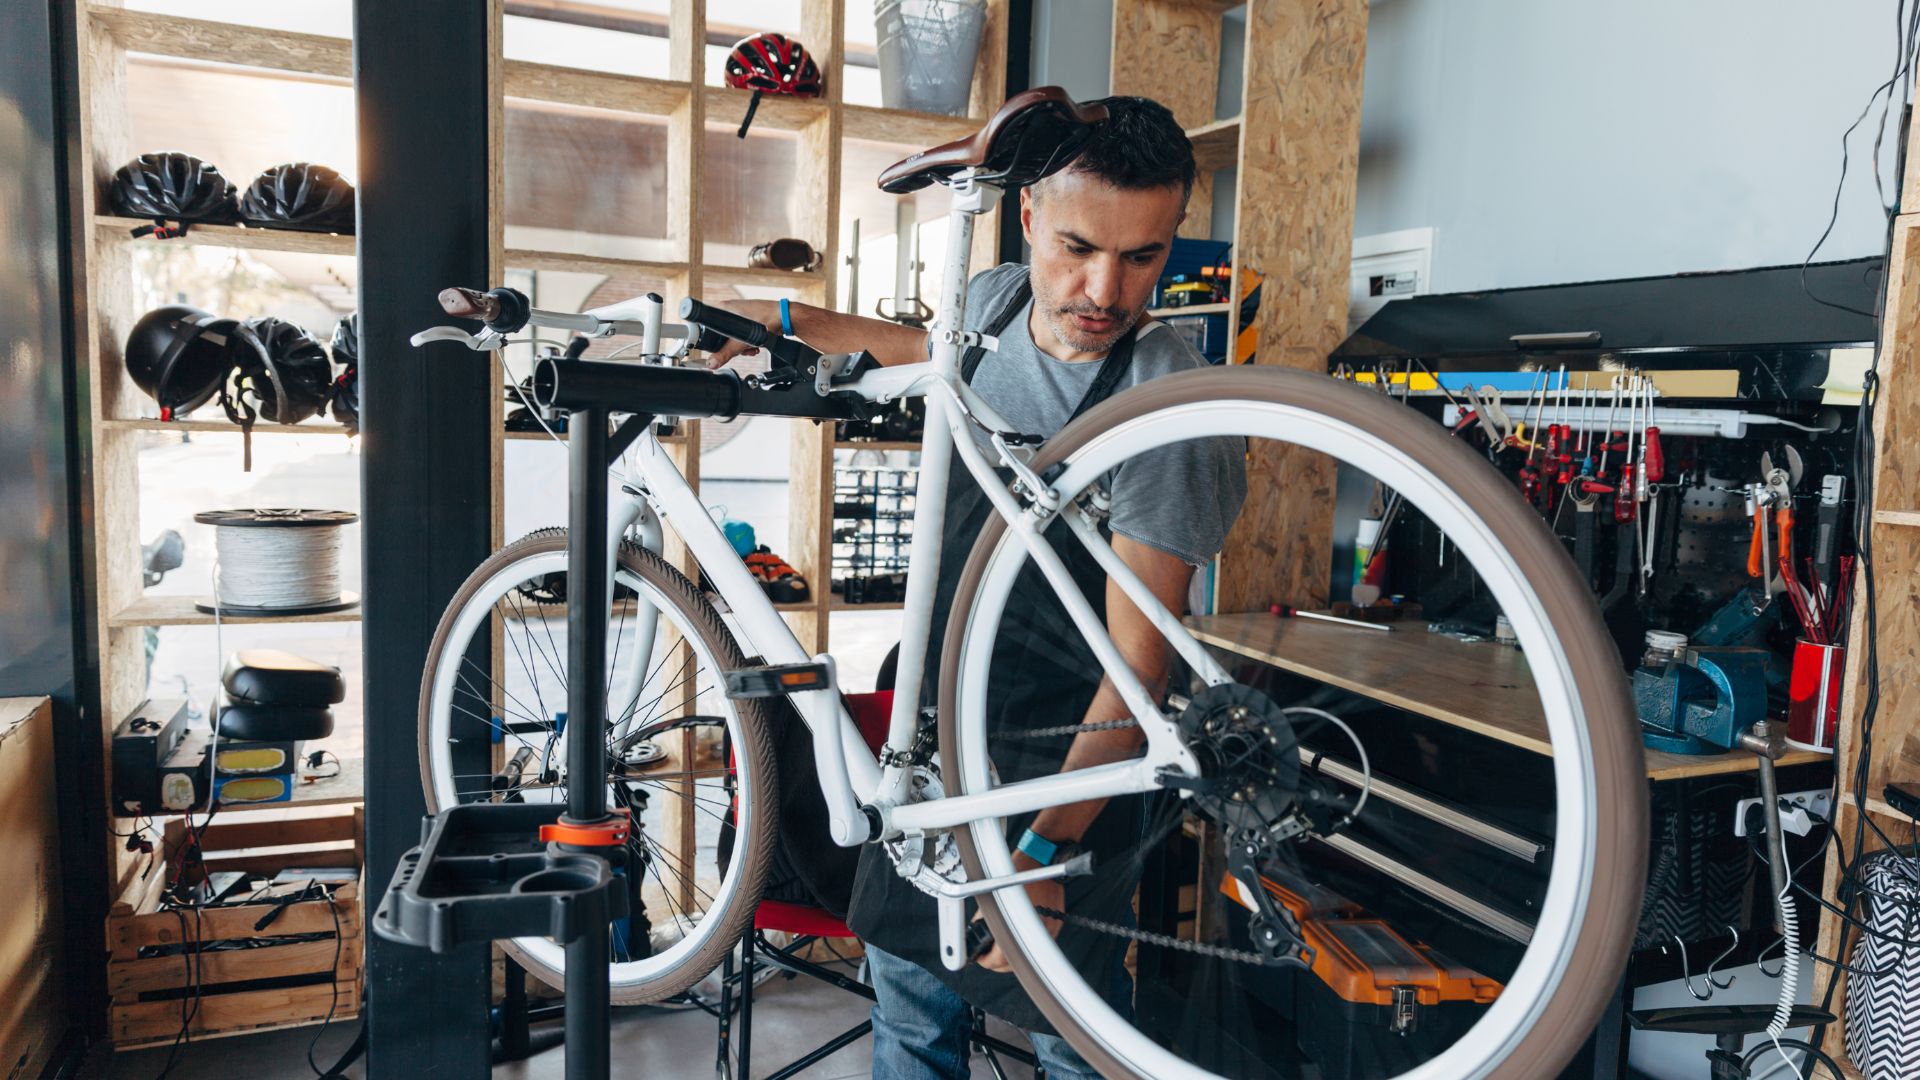 image showing a bicycle mechanic working on a bike